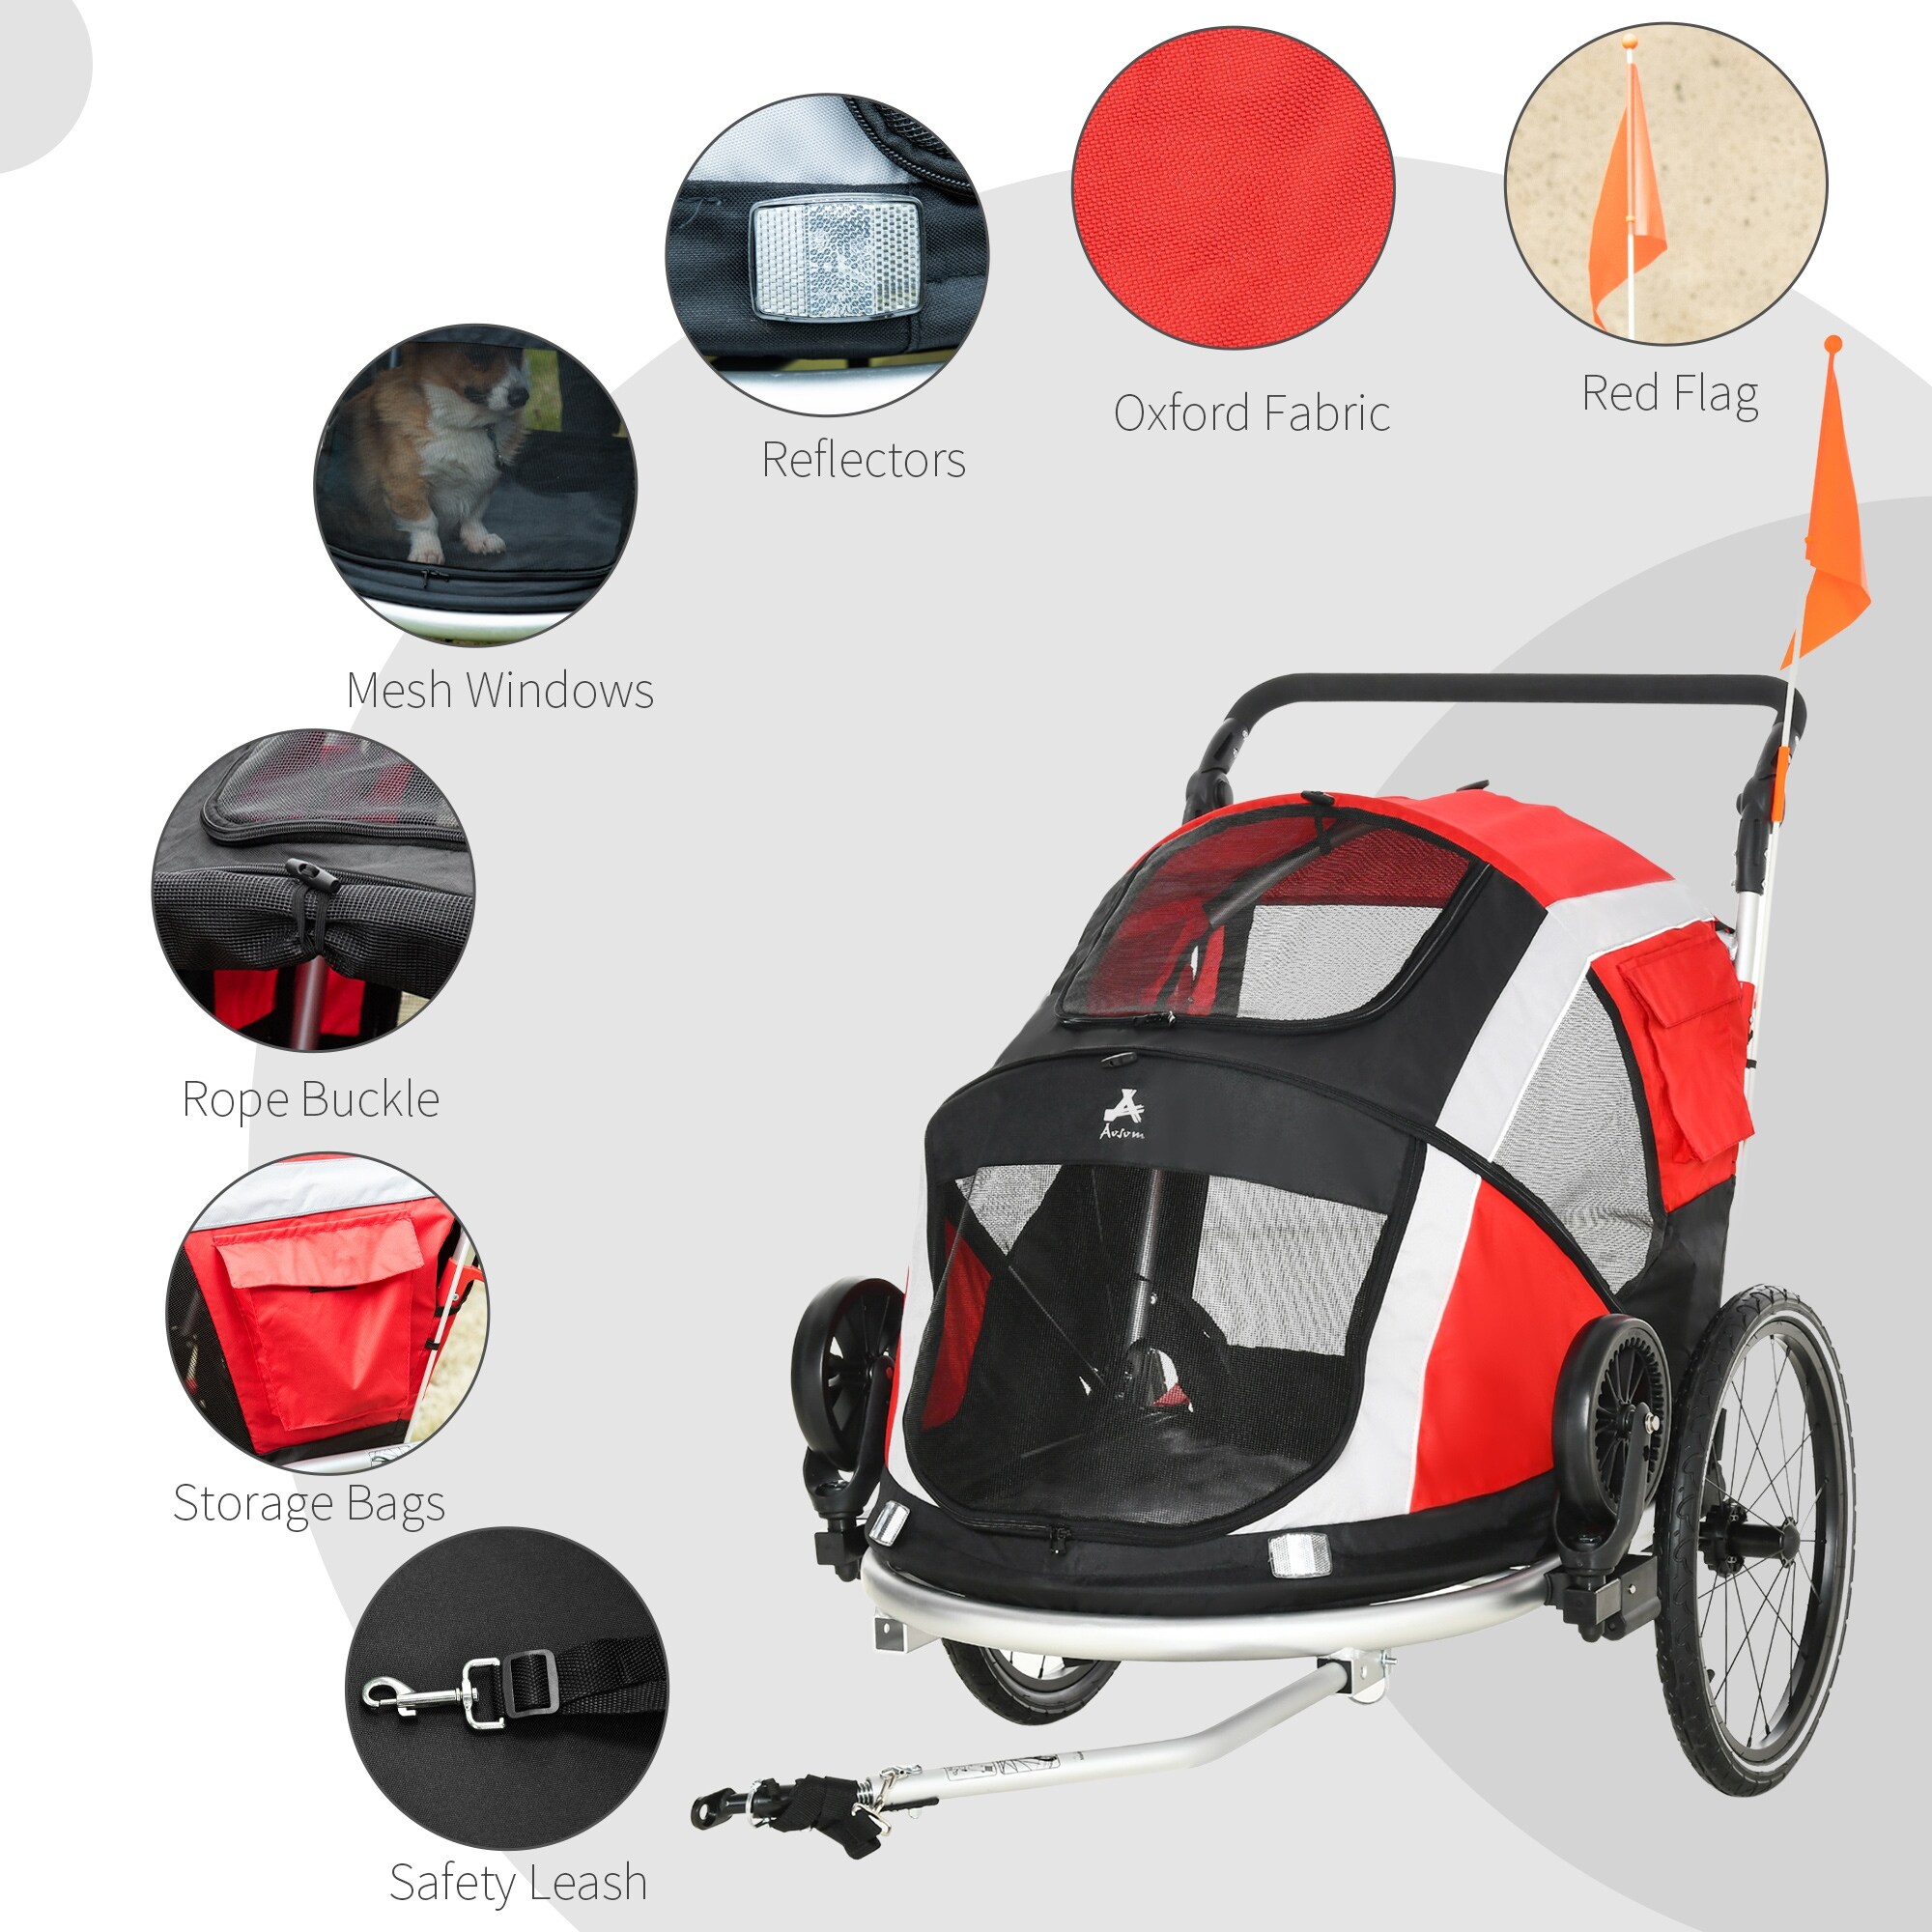 Aosom 2-in-1 Pet Bike Trailer, Dog Stroller, Small Pet Bicycle Cart Carrier  with Safety Leash, and Easy Fold Design - Bed Bath & Beyond - 35682721